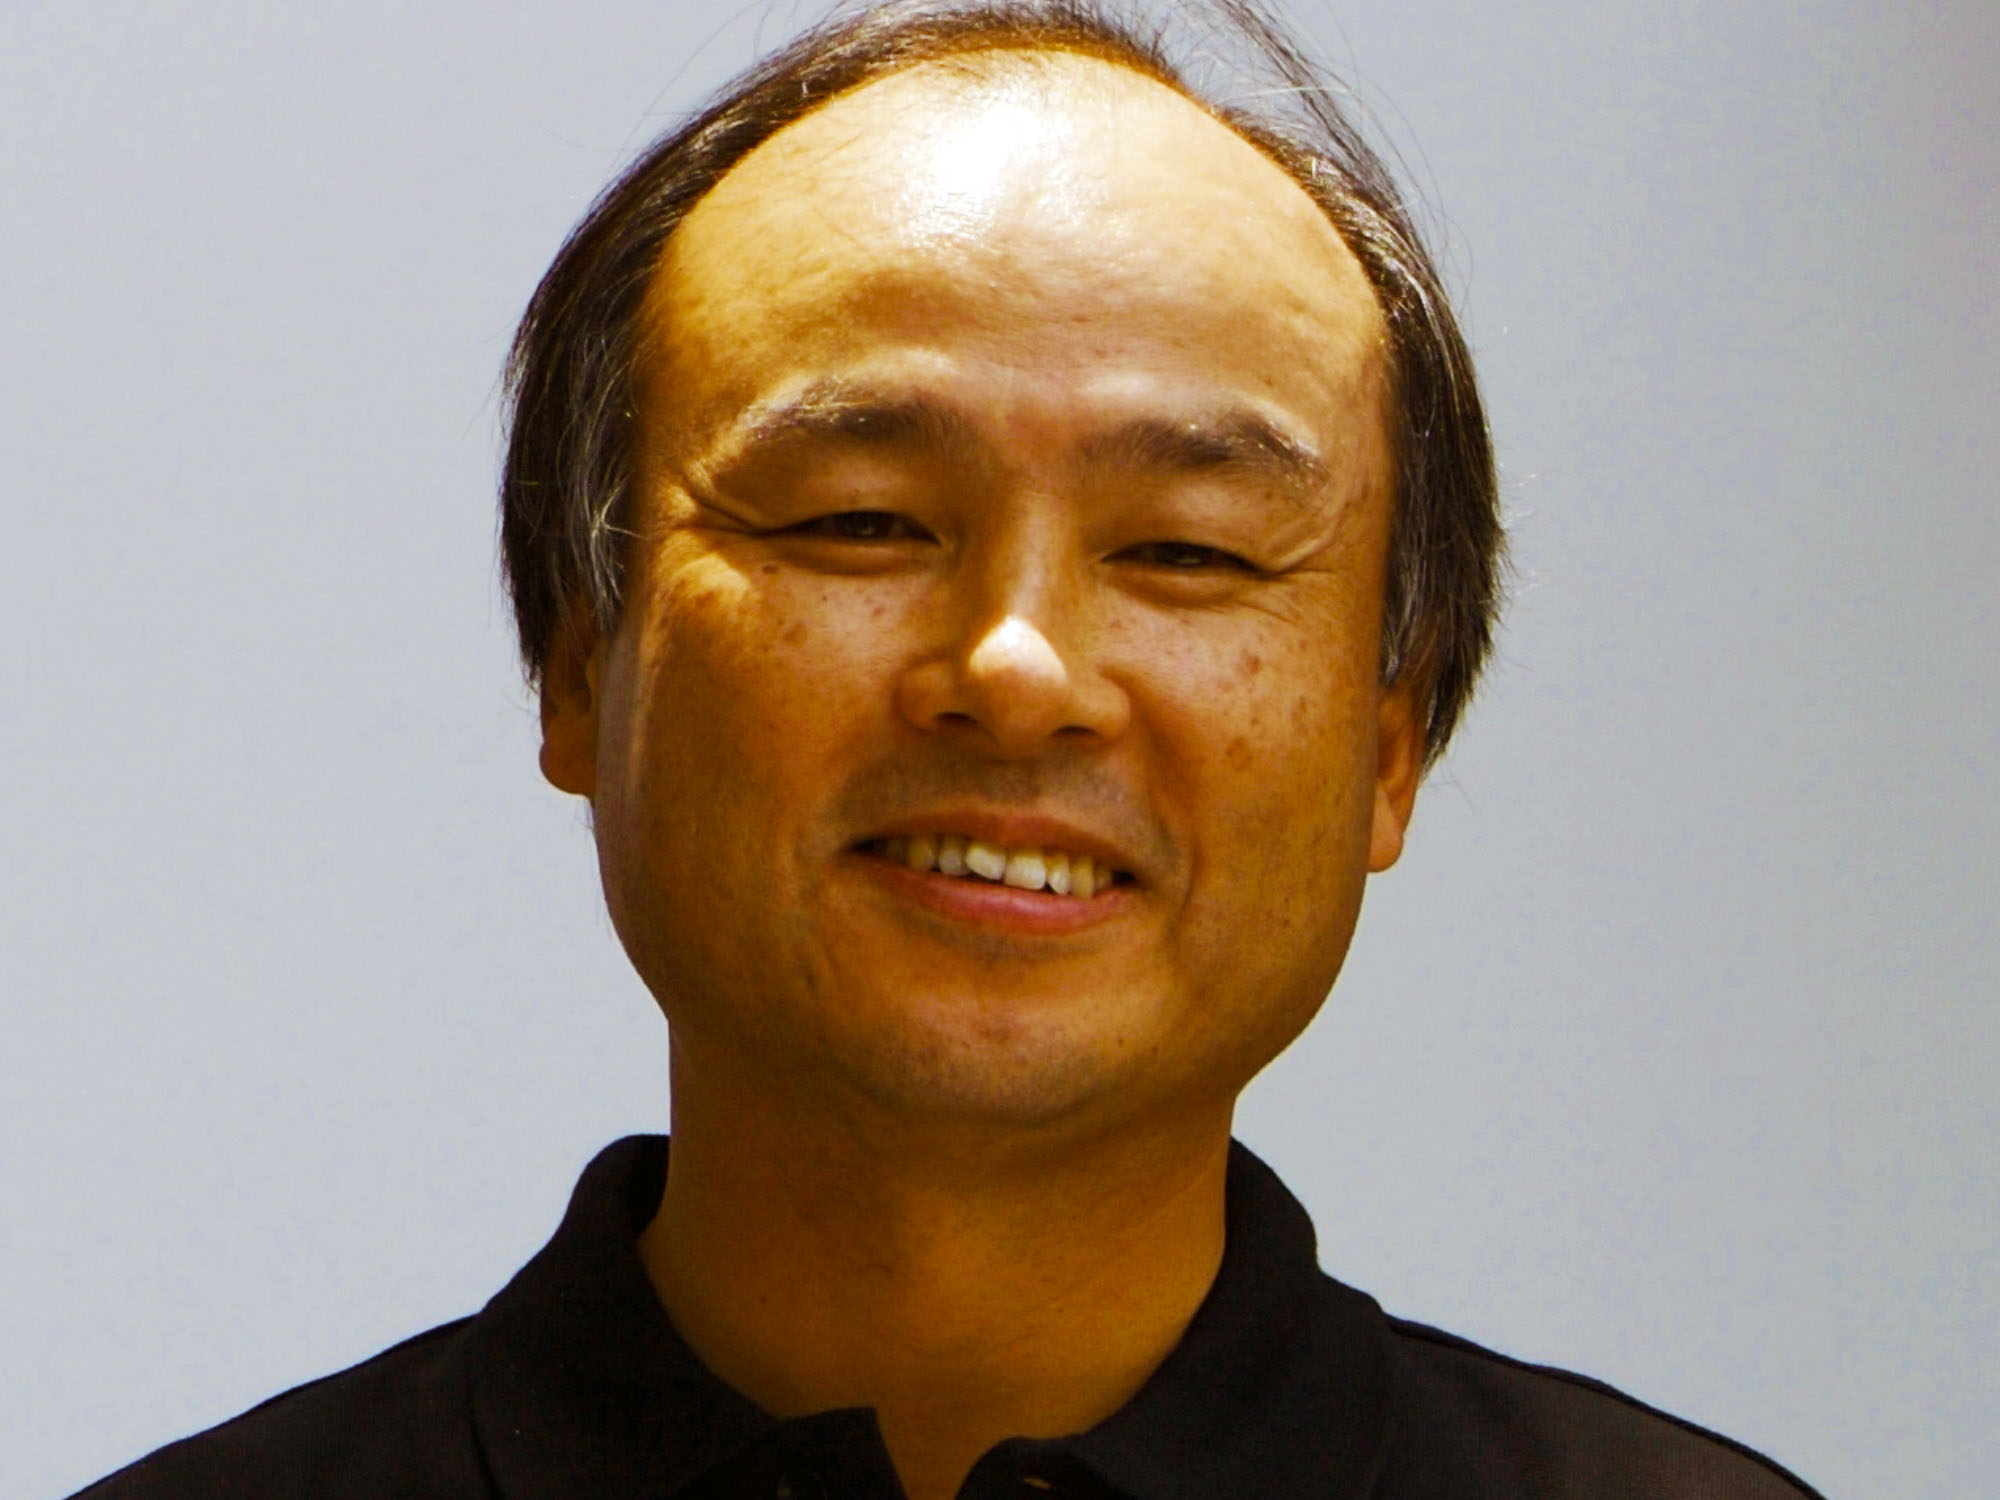 Masayoshi Son threatened to set himself on fire in Japan’s Postal Ministry?!